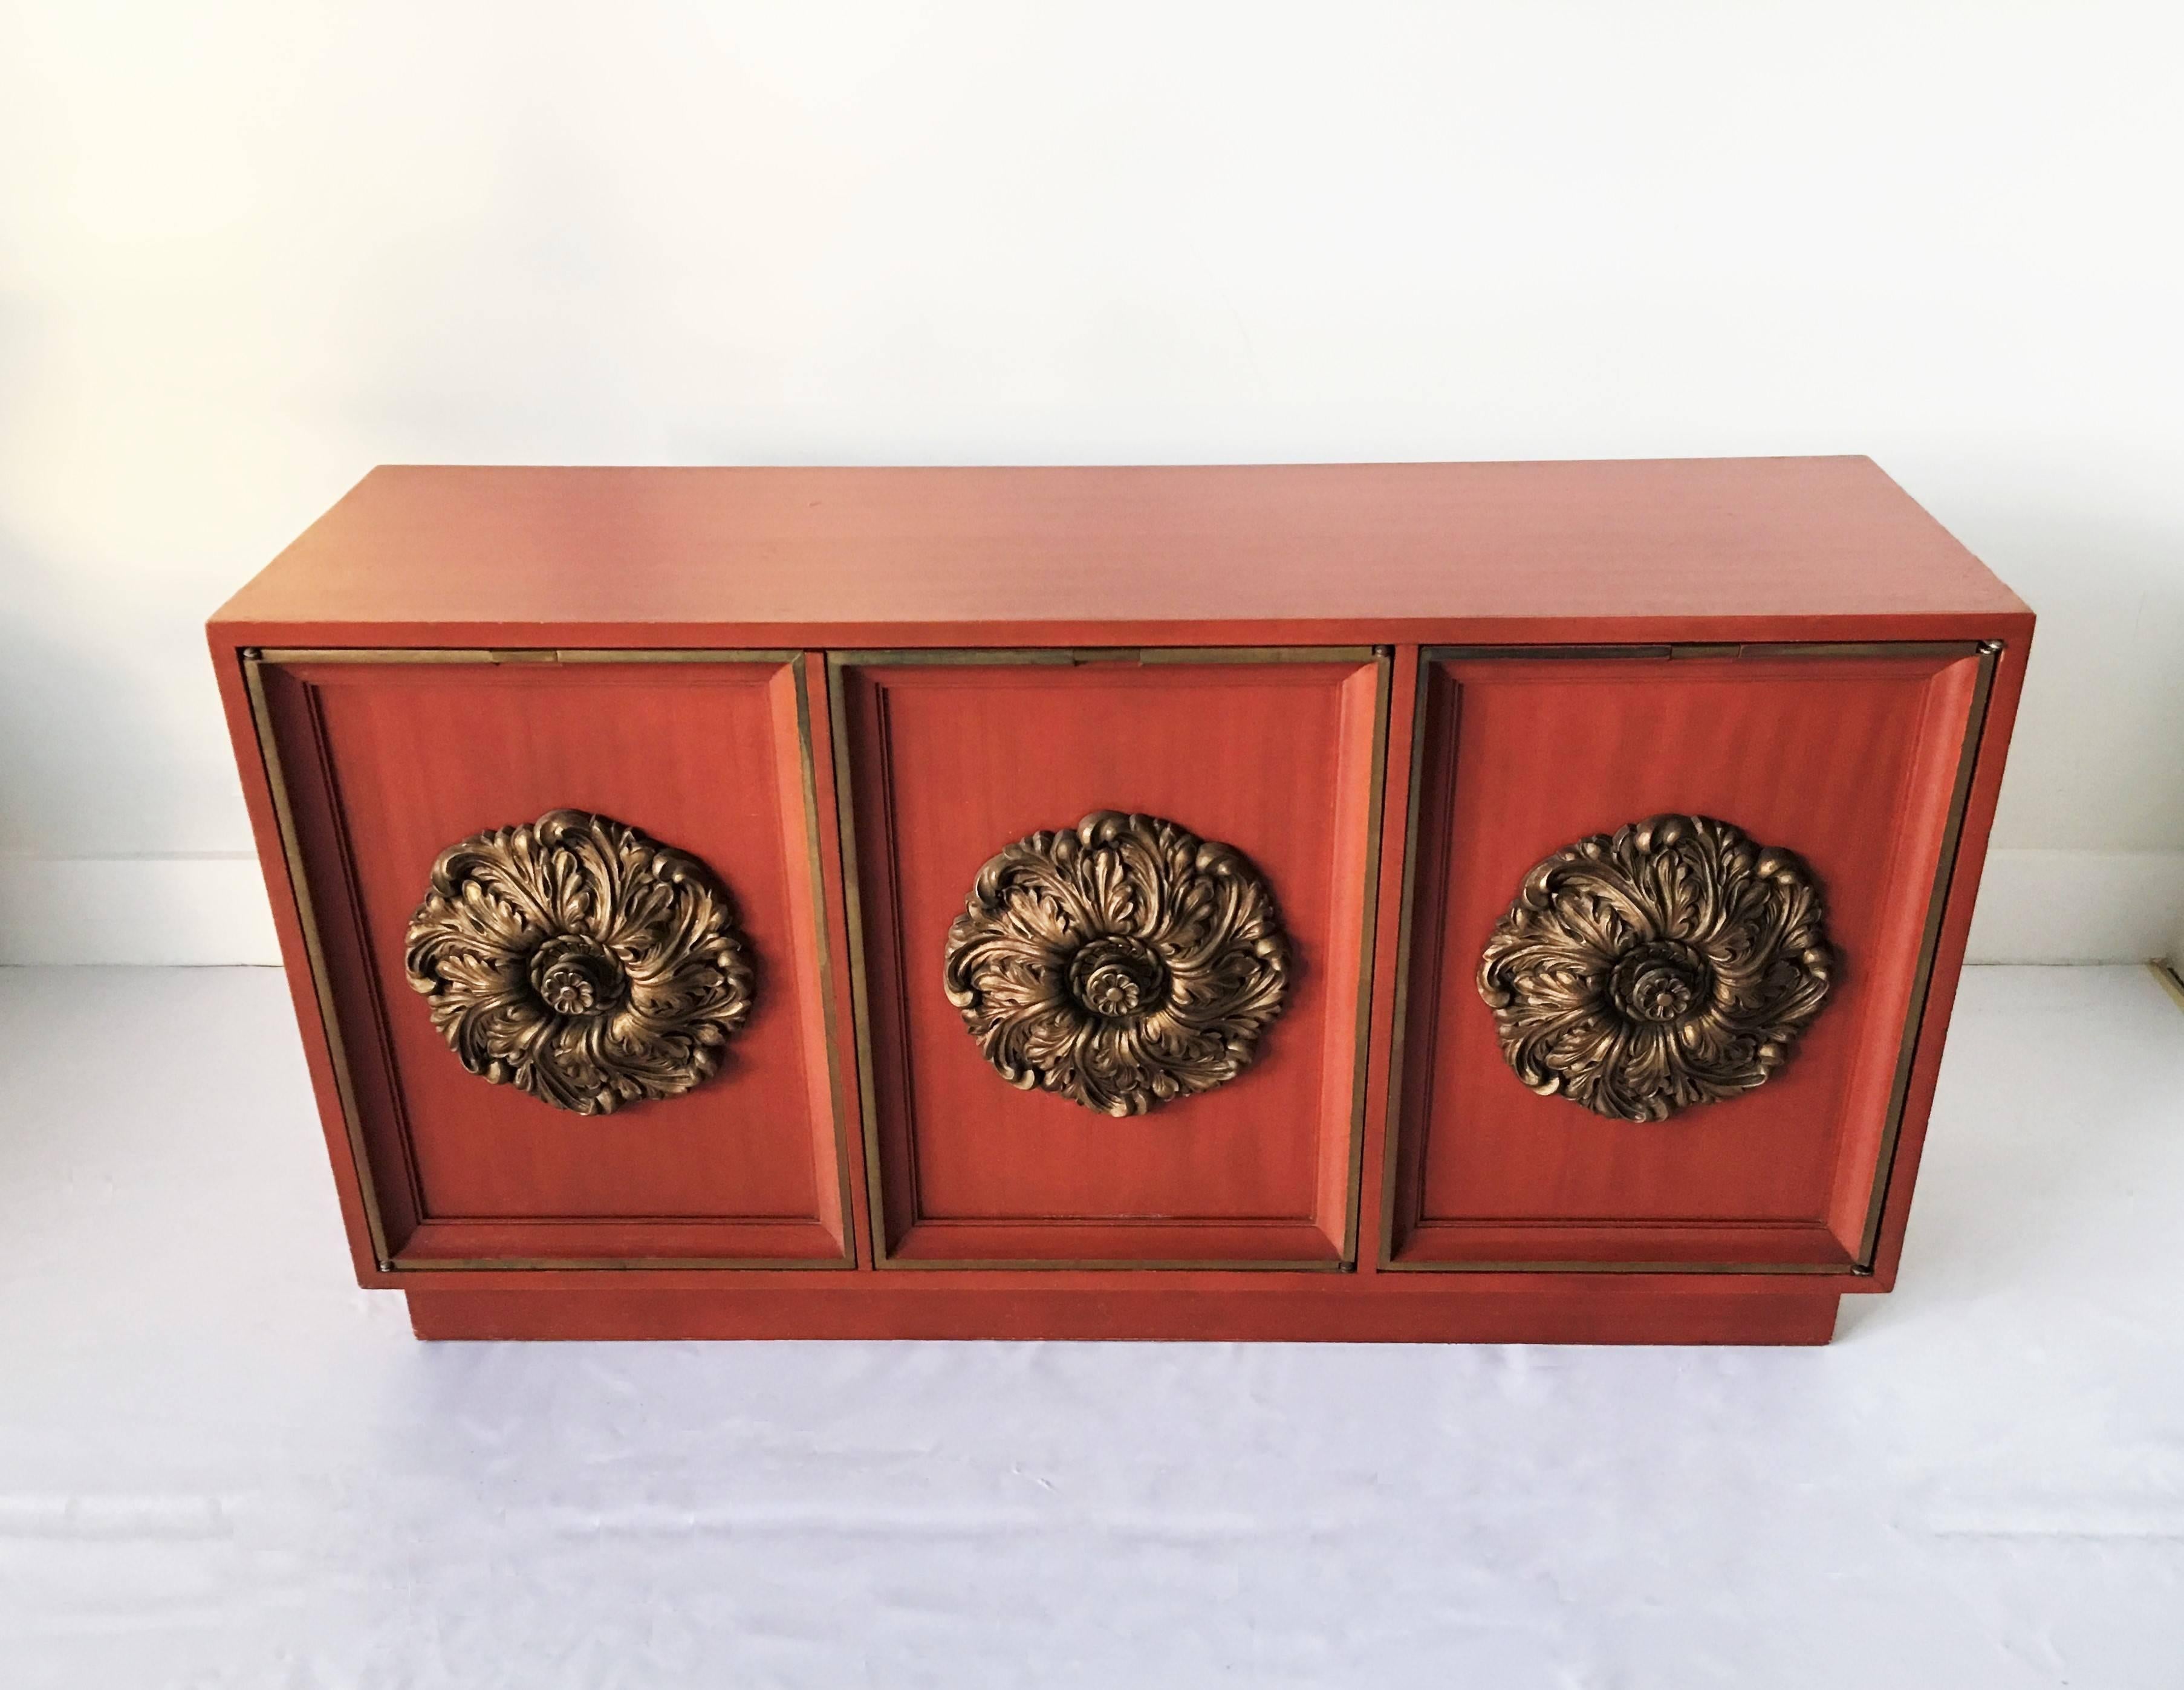 Absolutely stunning James Mont style credenza or buffet, with gilt medallions. Has three cabinet doors and the interior boasts a single shelf inside. An outstanding, incredibly chic piece in a very rare size.